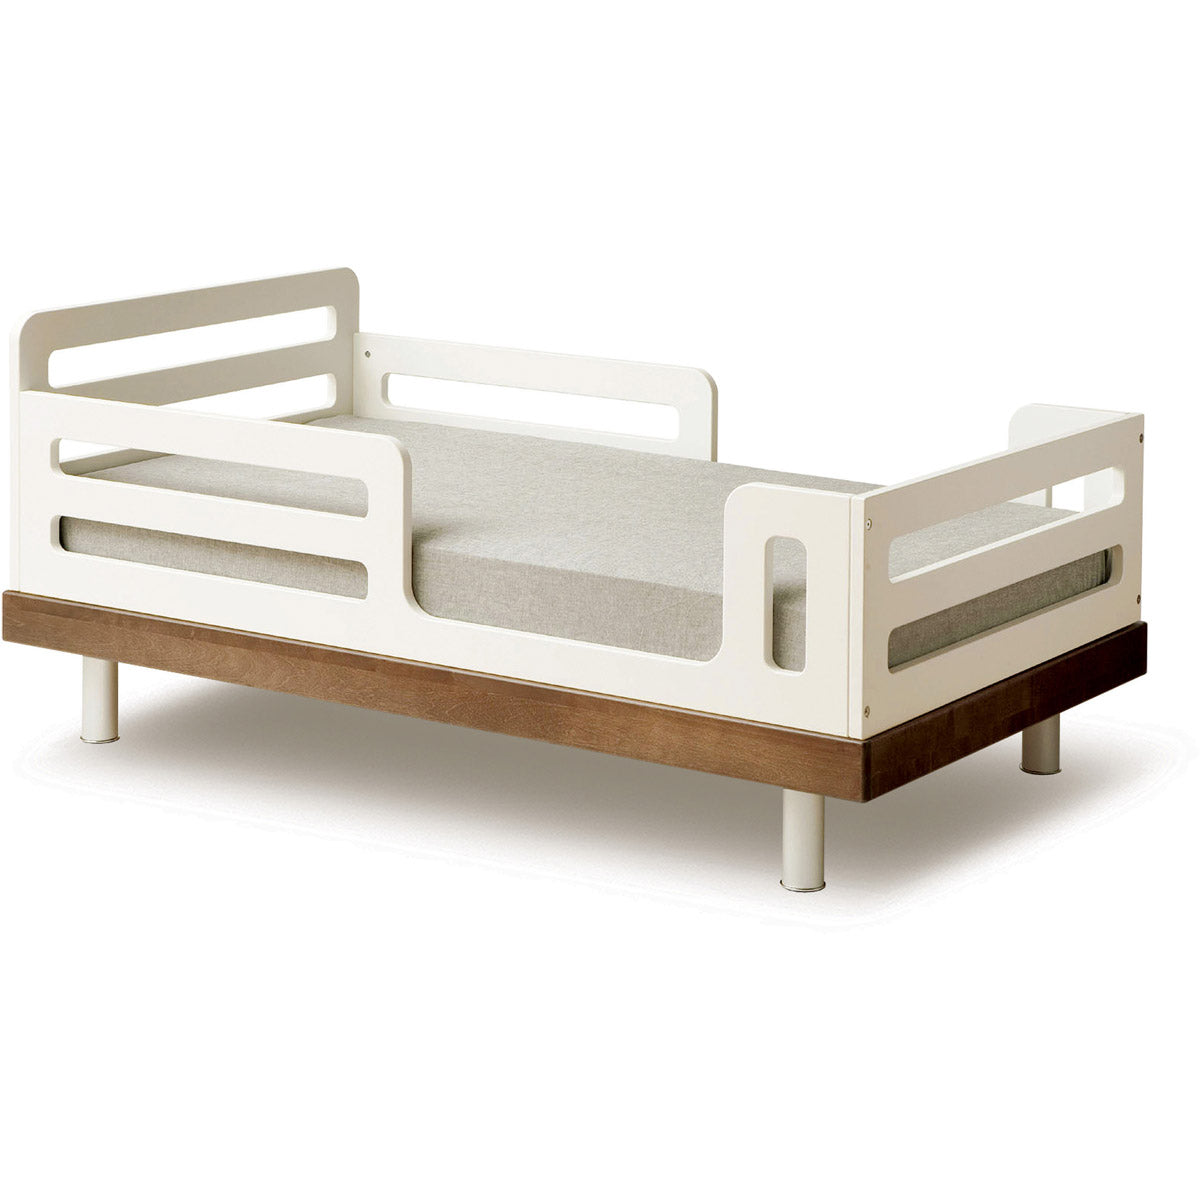 Oeuf Classic Toddler Bed Conversion Kit Kids + Baby